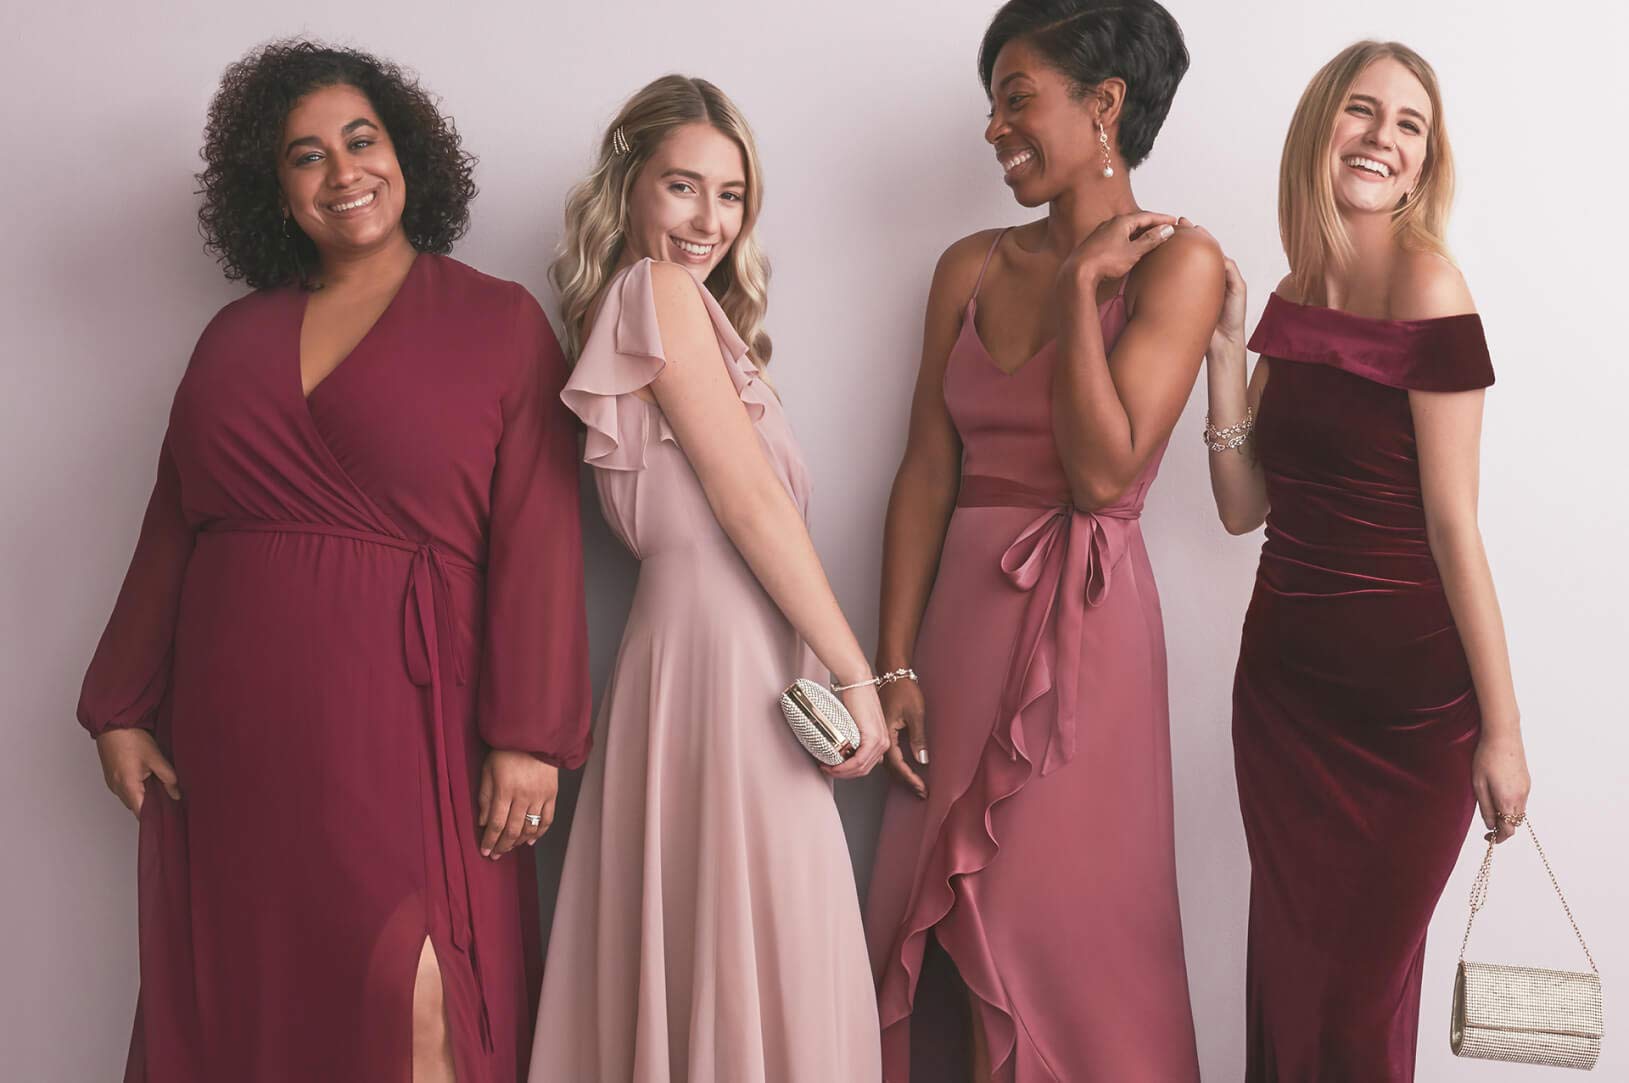 4 bridesmaids wearing different red dresses standing next to each other smiling